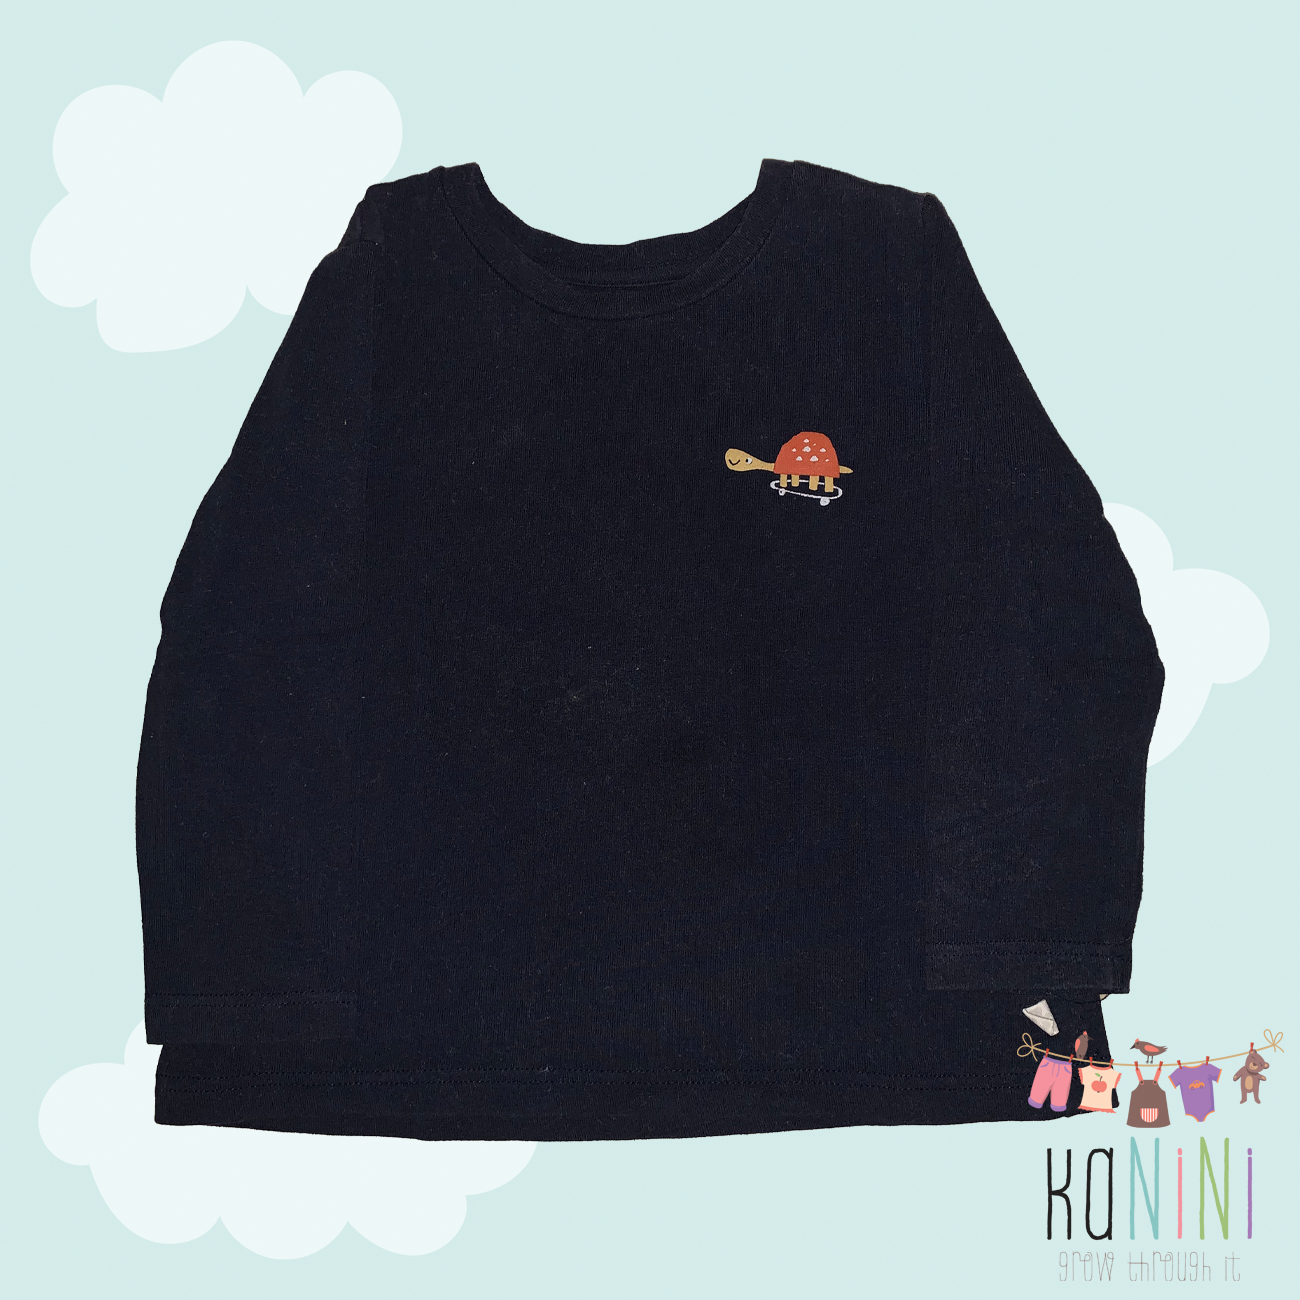 Featured image for “Woolworths 12 - 18 Months Boys Long Sleeve T-Shirt”